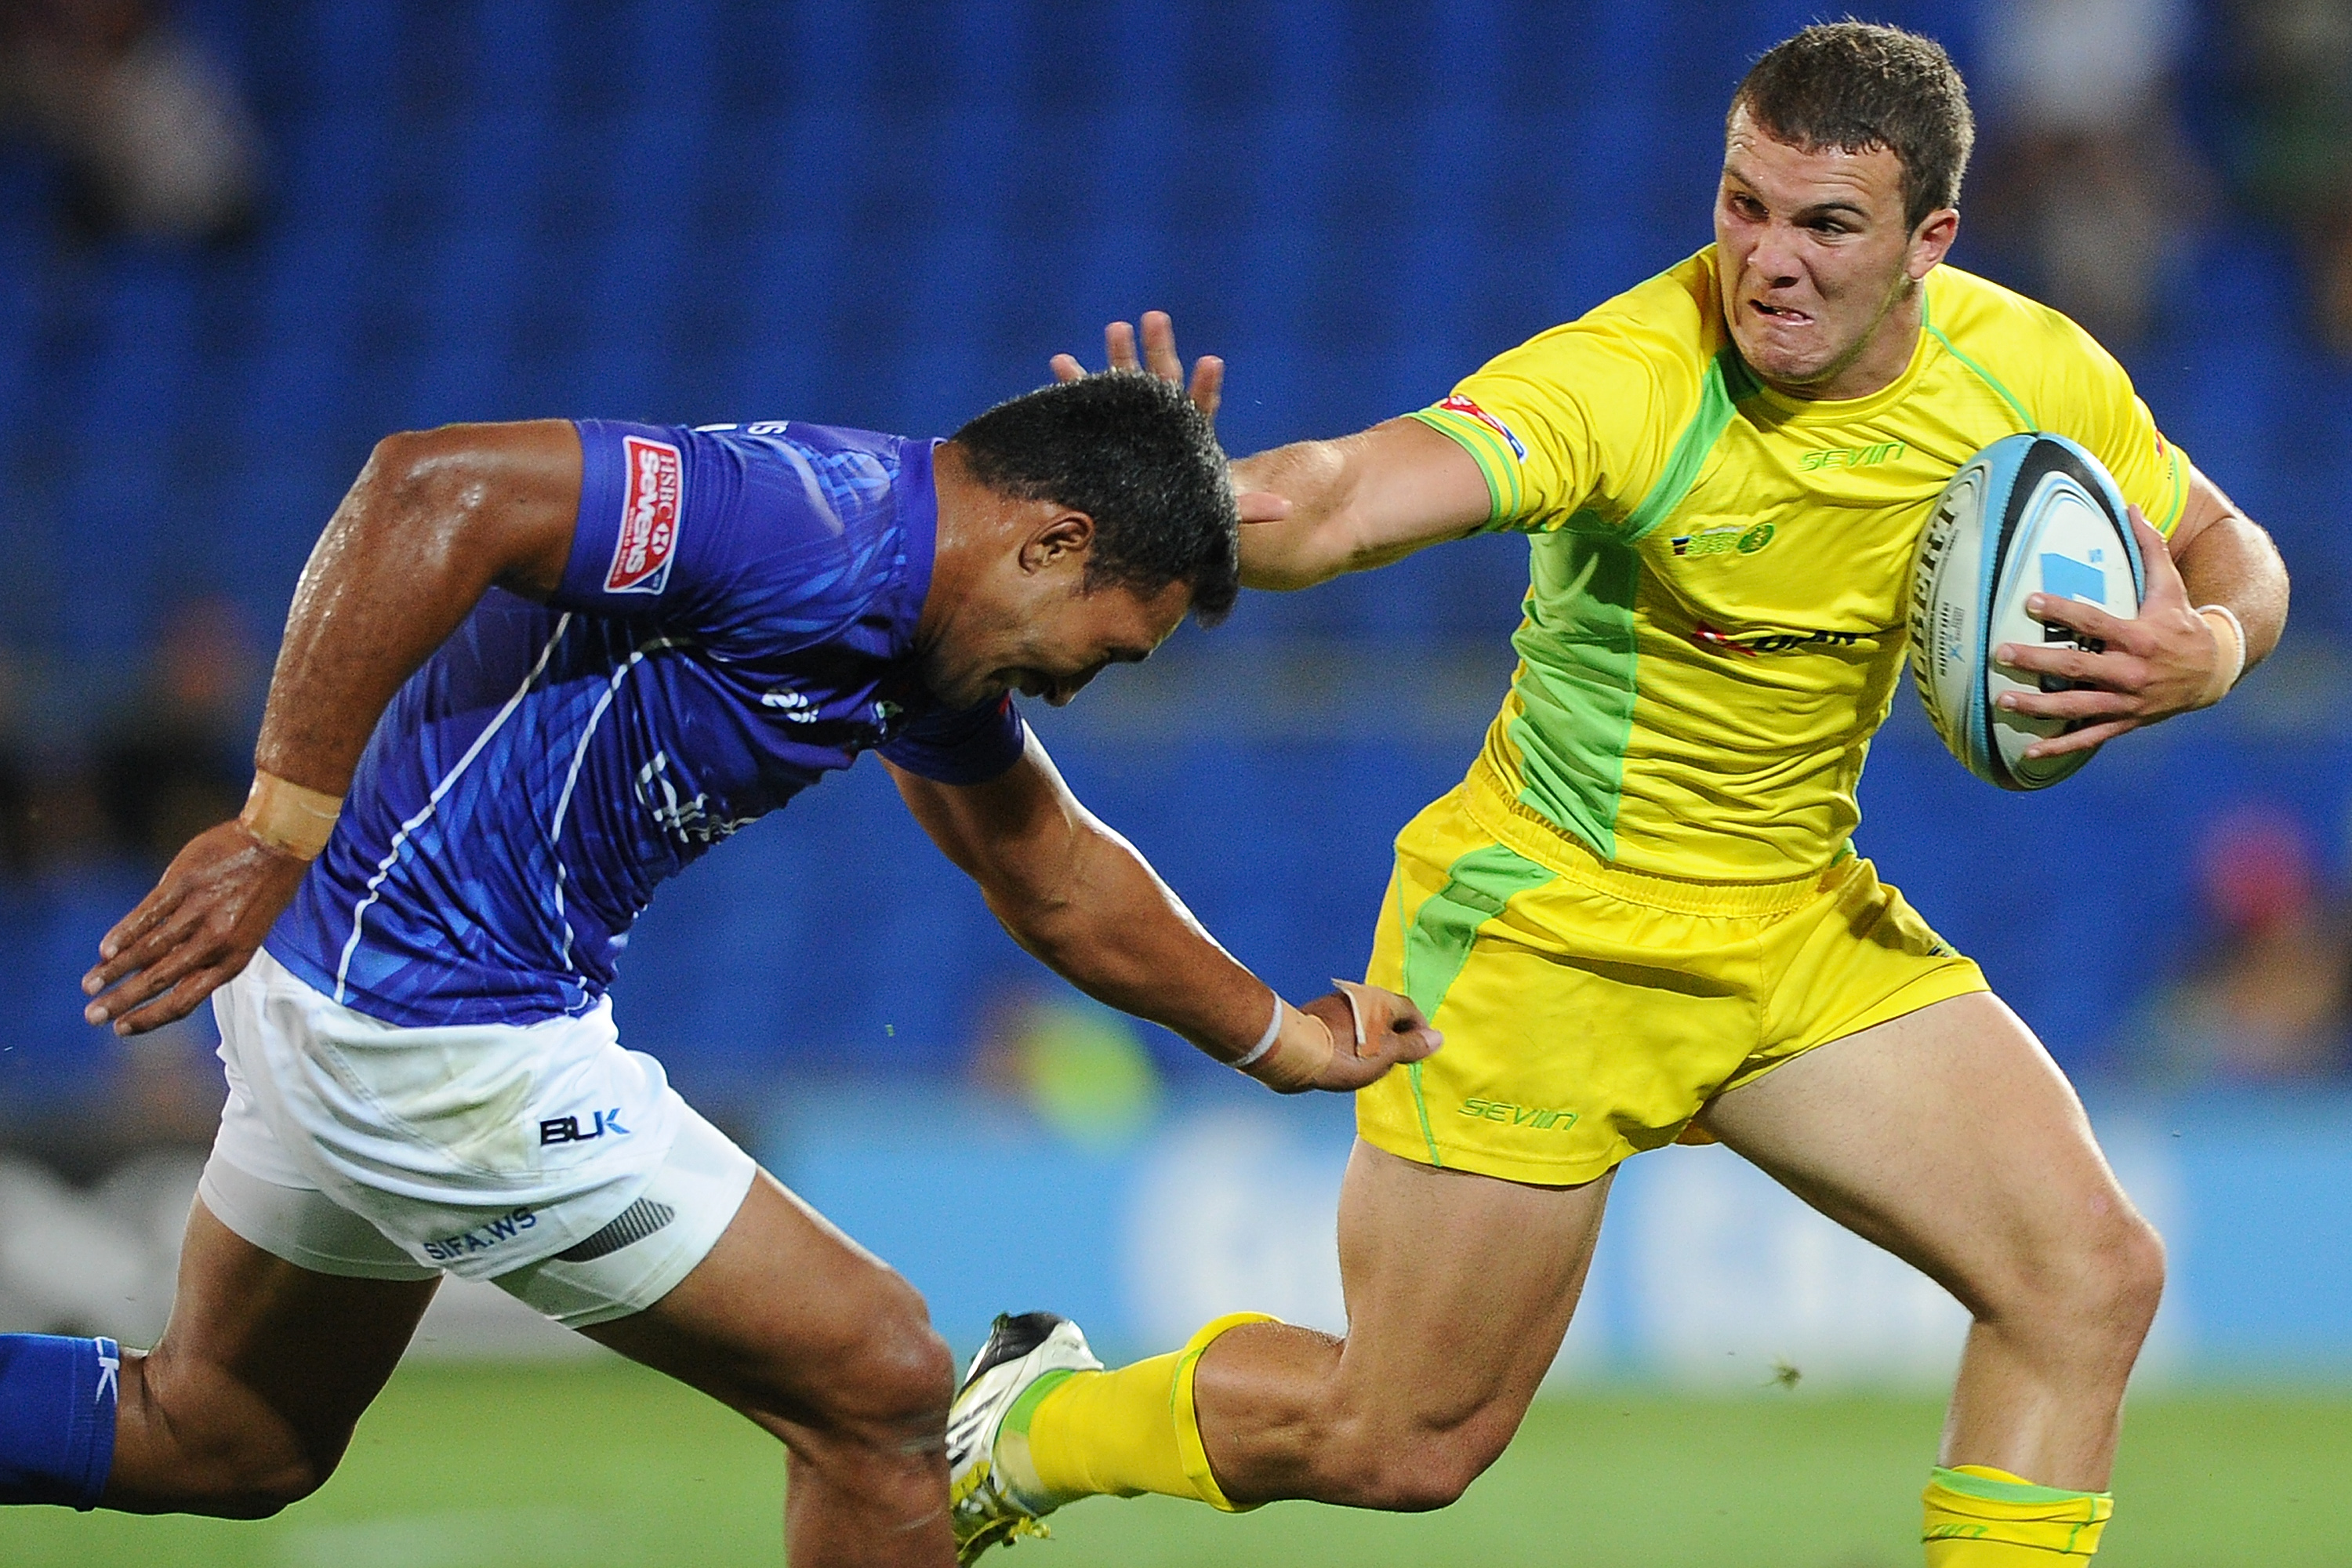 Alex Gibbon of Australia takes on the Samoa defence at the Gold Coast Sevens in 2013.